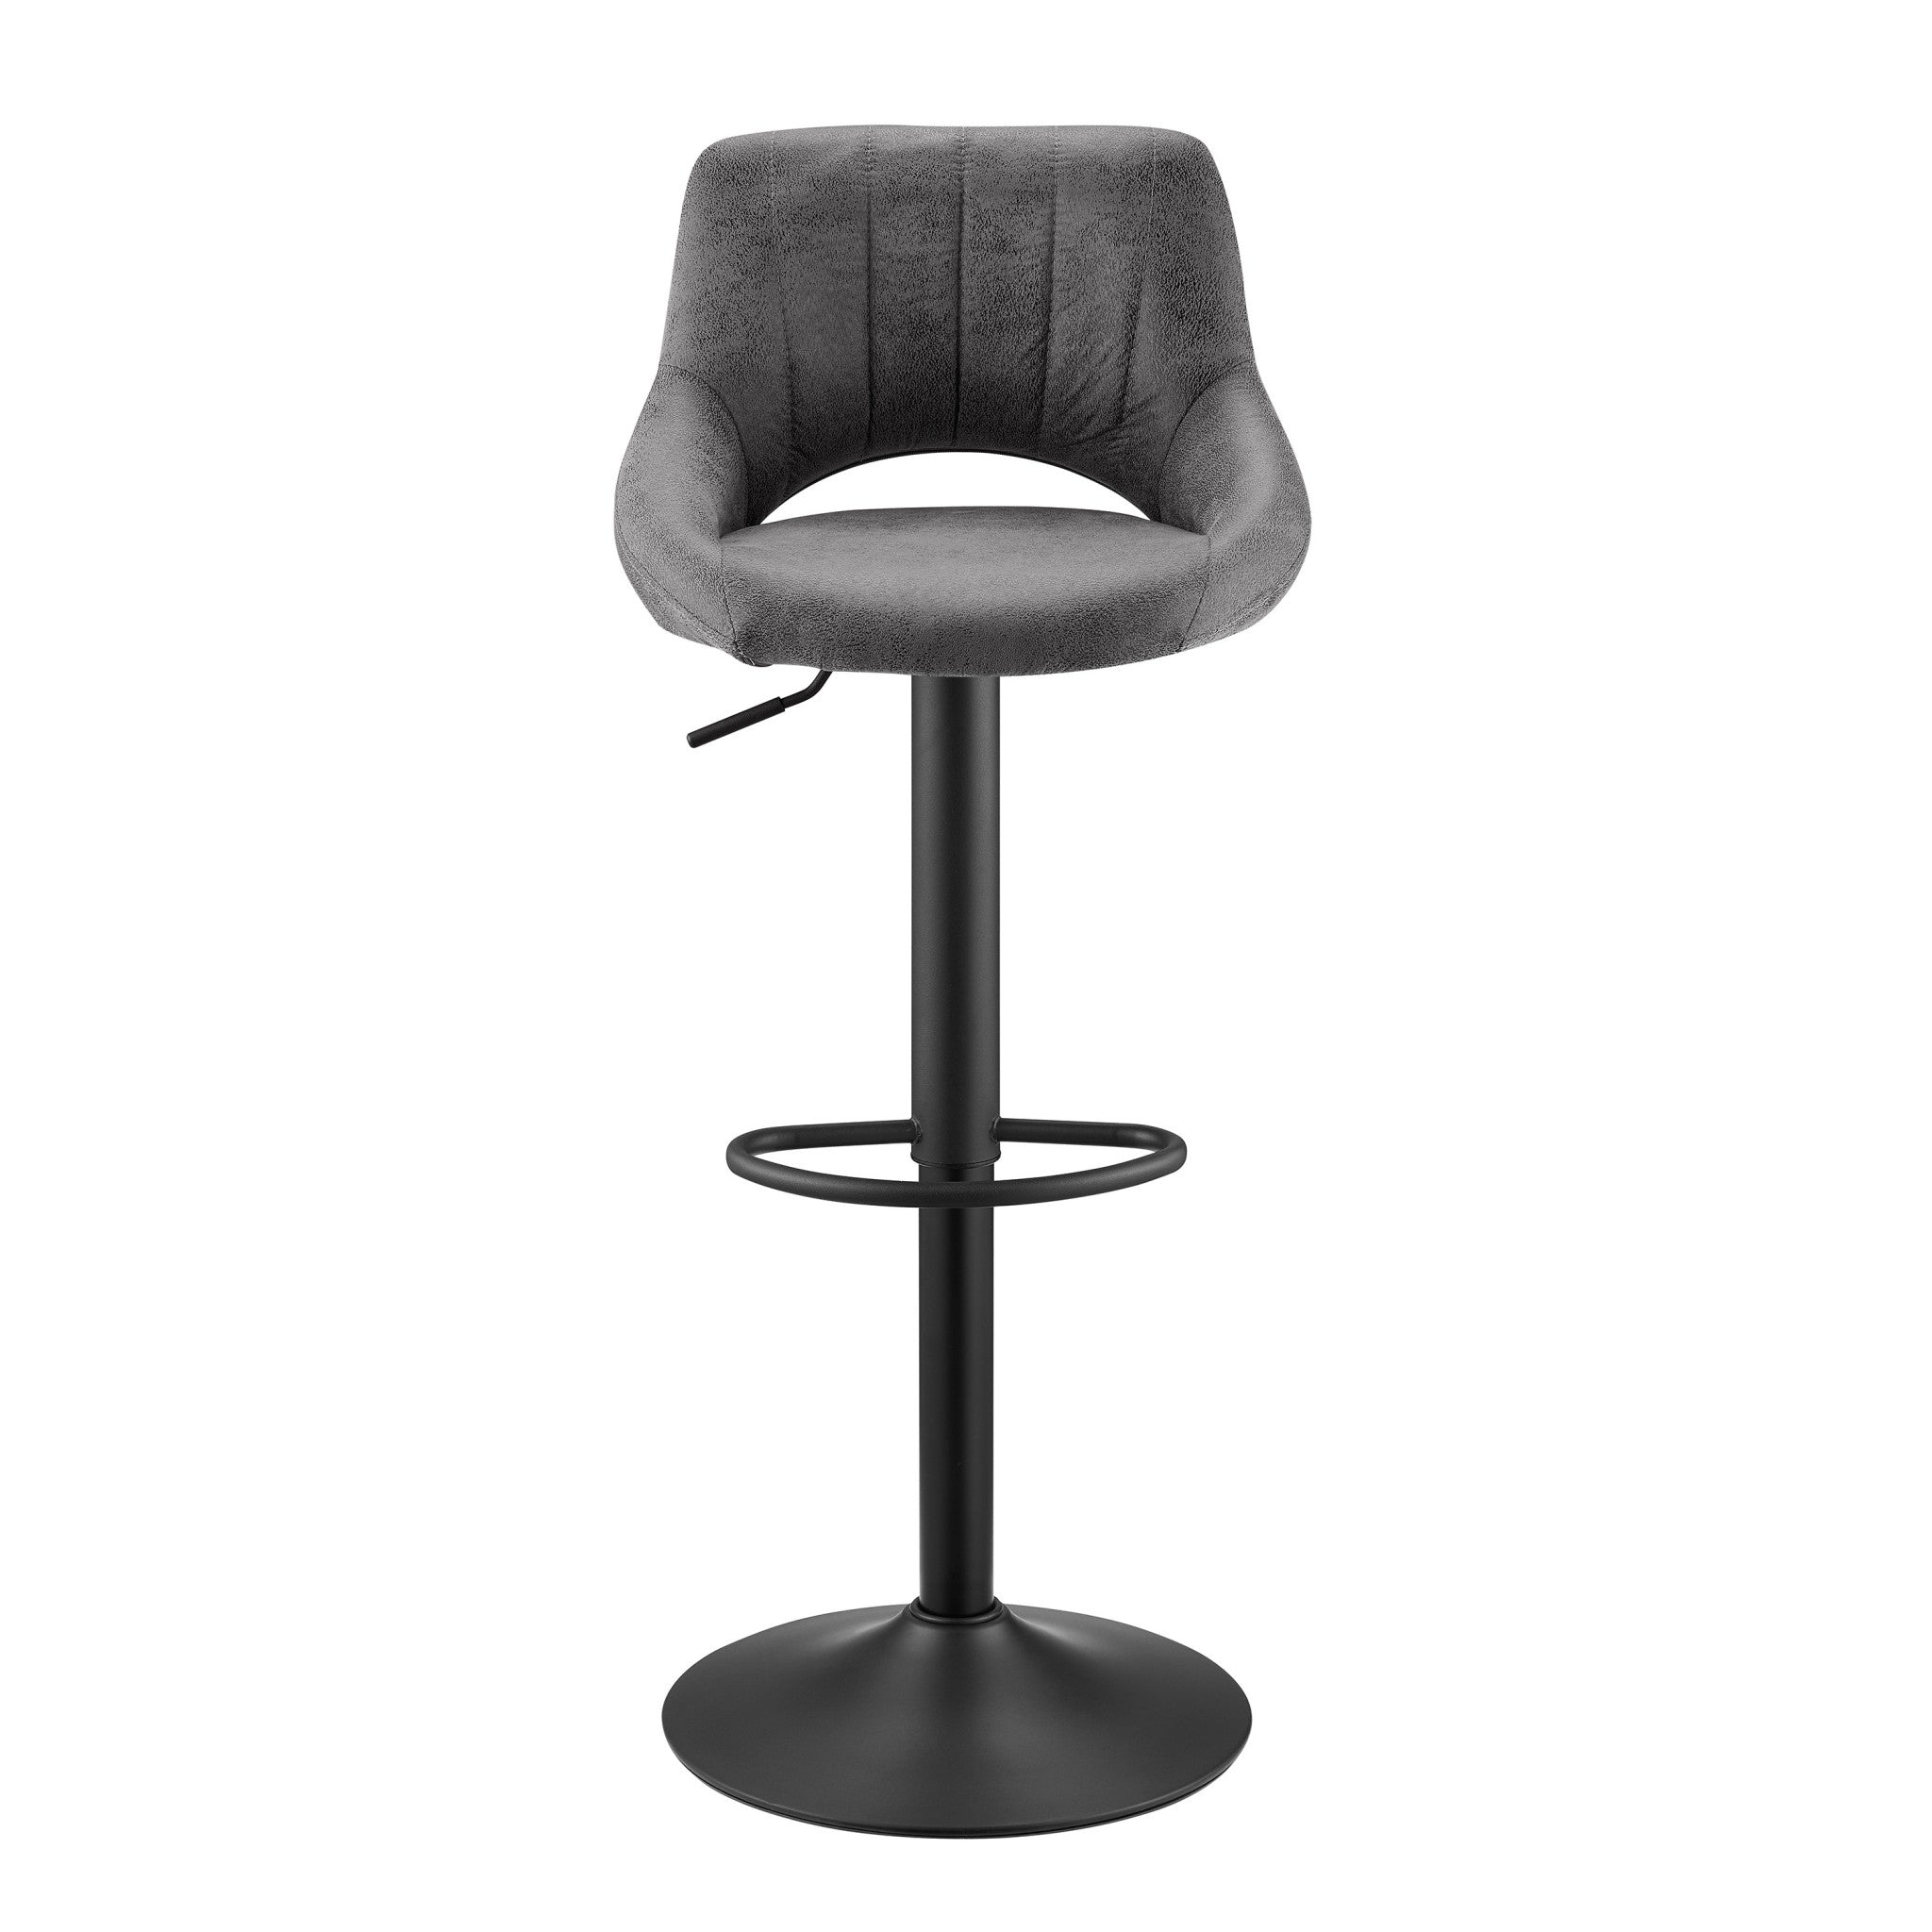 Set of Two 32" Gray And Black Faux Leather And Steel Swivel Low Back Adjustable Height Bar Chairs